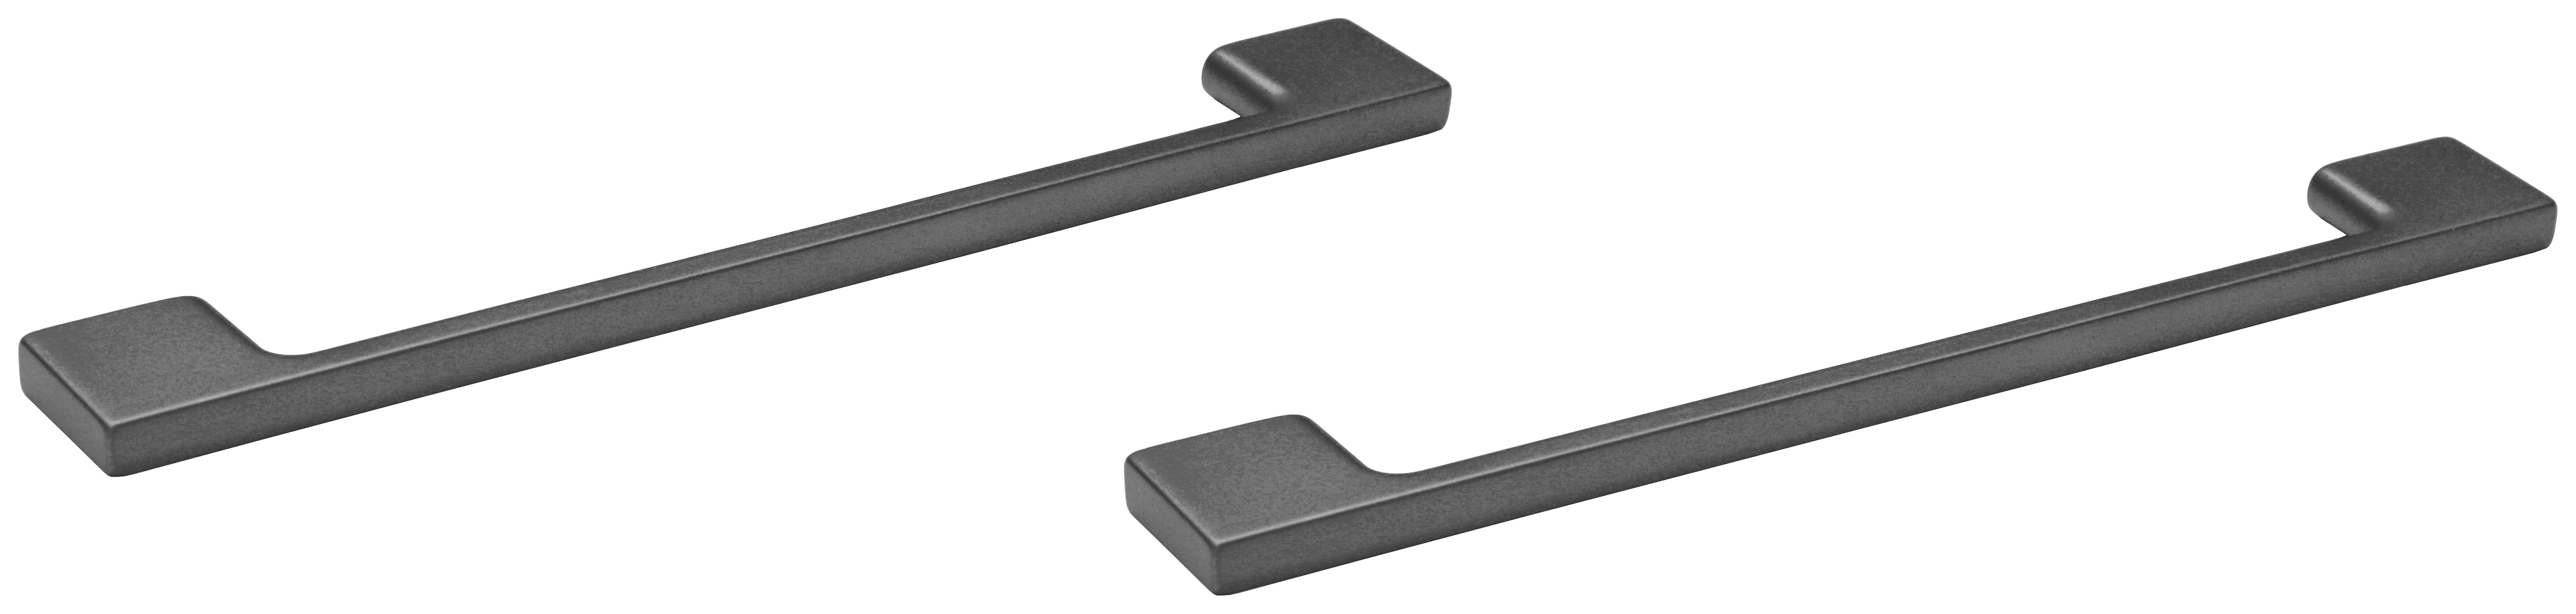 Abacus Concept Matt Anthracite Bathroom Furniture Handle for Freestanding Unit - Pack of 2